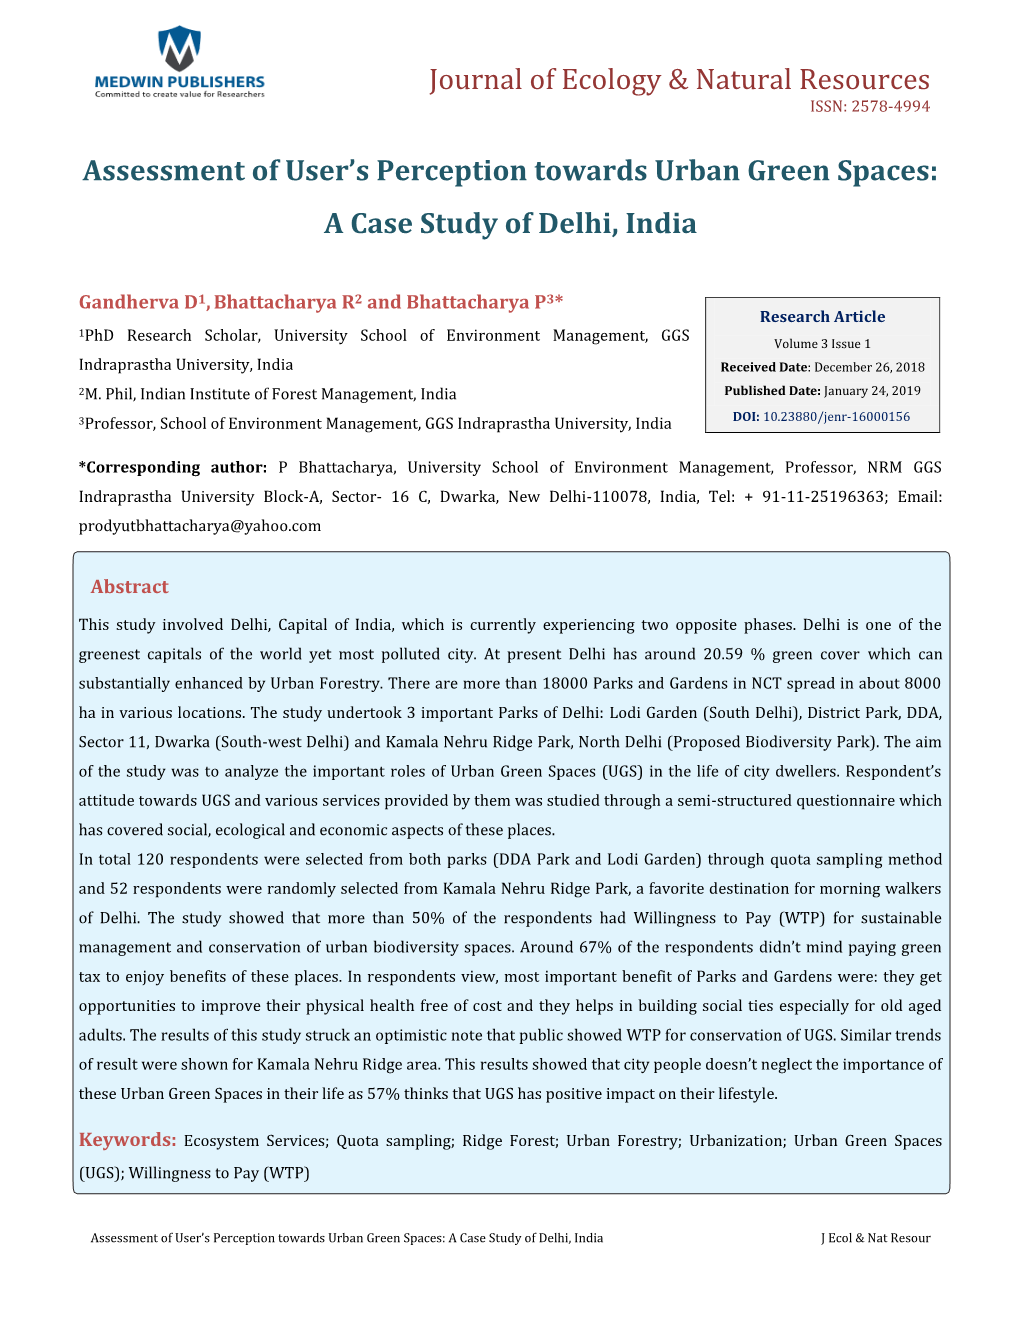 Assessment of User's Perception Towards Urban Green Spaces